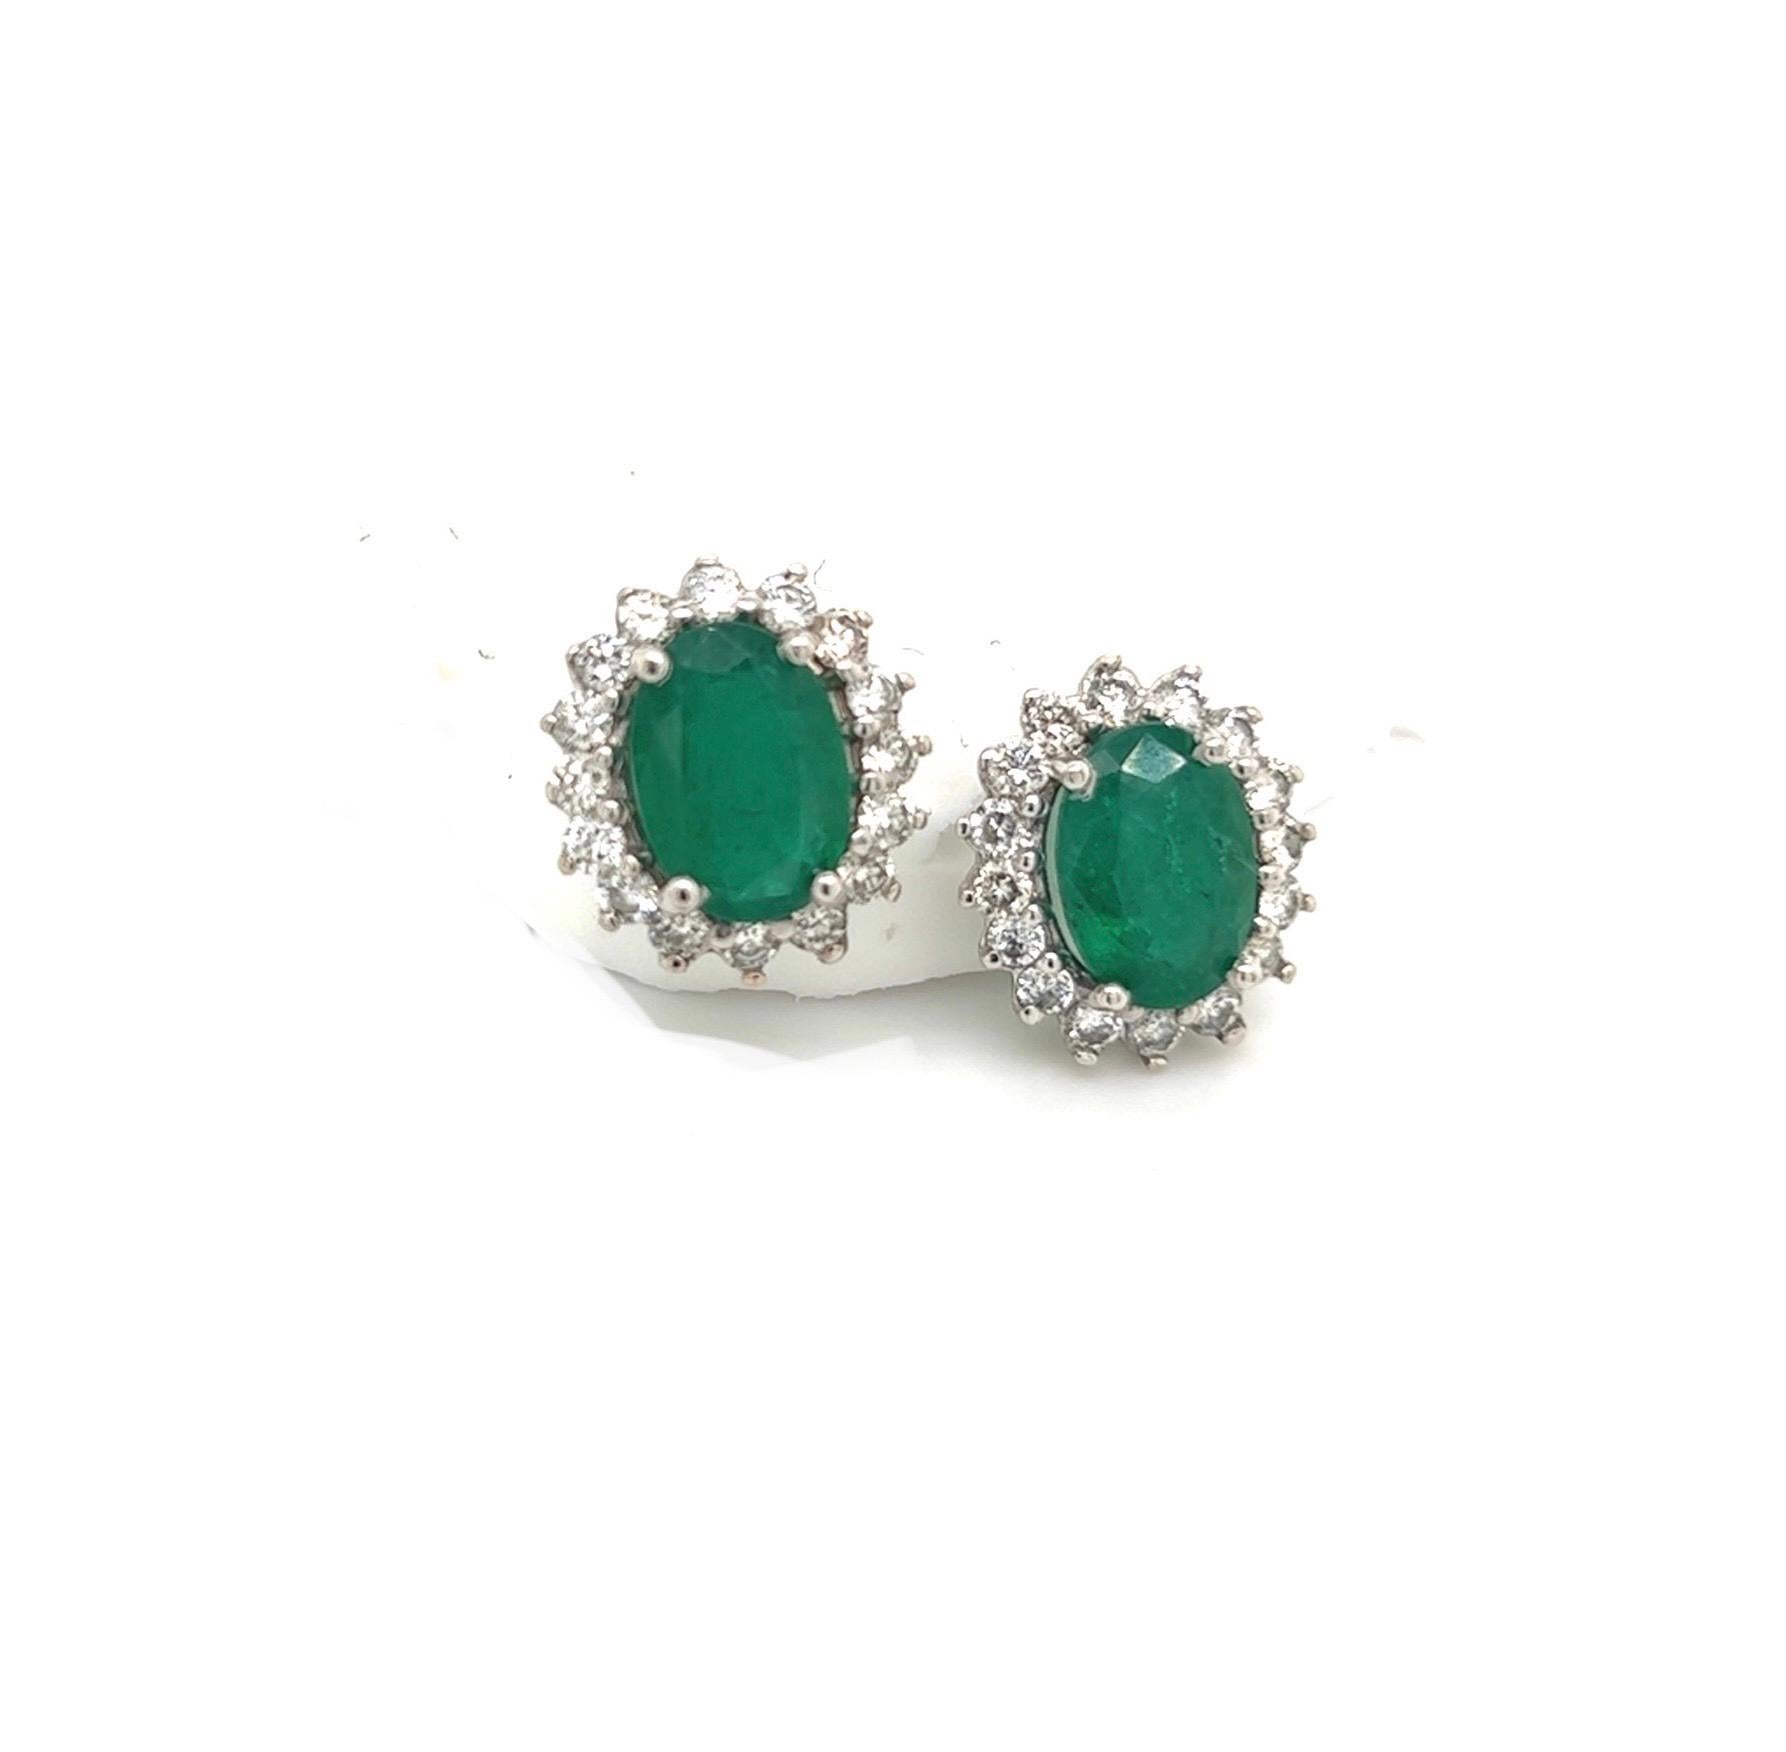 Natural Emerald Diamond Earrings 14k Gold 2.87 TCW Certified $6,950 211888

Nothing says, “I Love you” more than Diamonds and Pearls!

These Emerald earrings have been Certified, Inspected, and Appraised by Gemological Appraisal